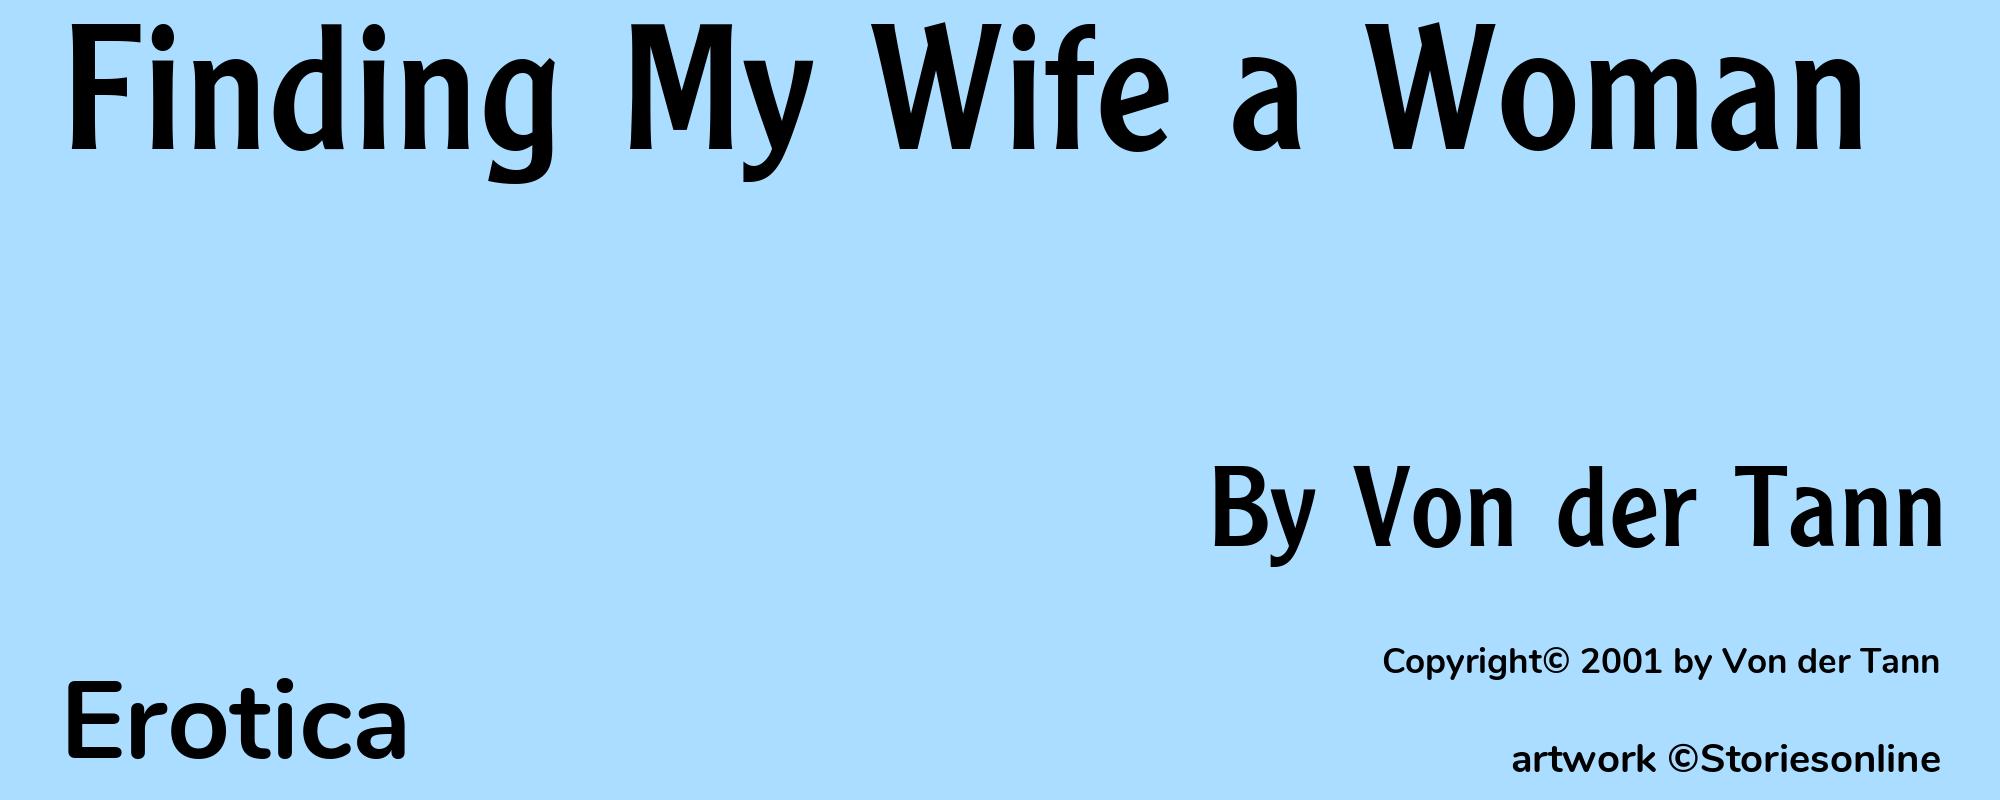 Finding My Wife a Woman - Cover